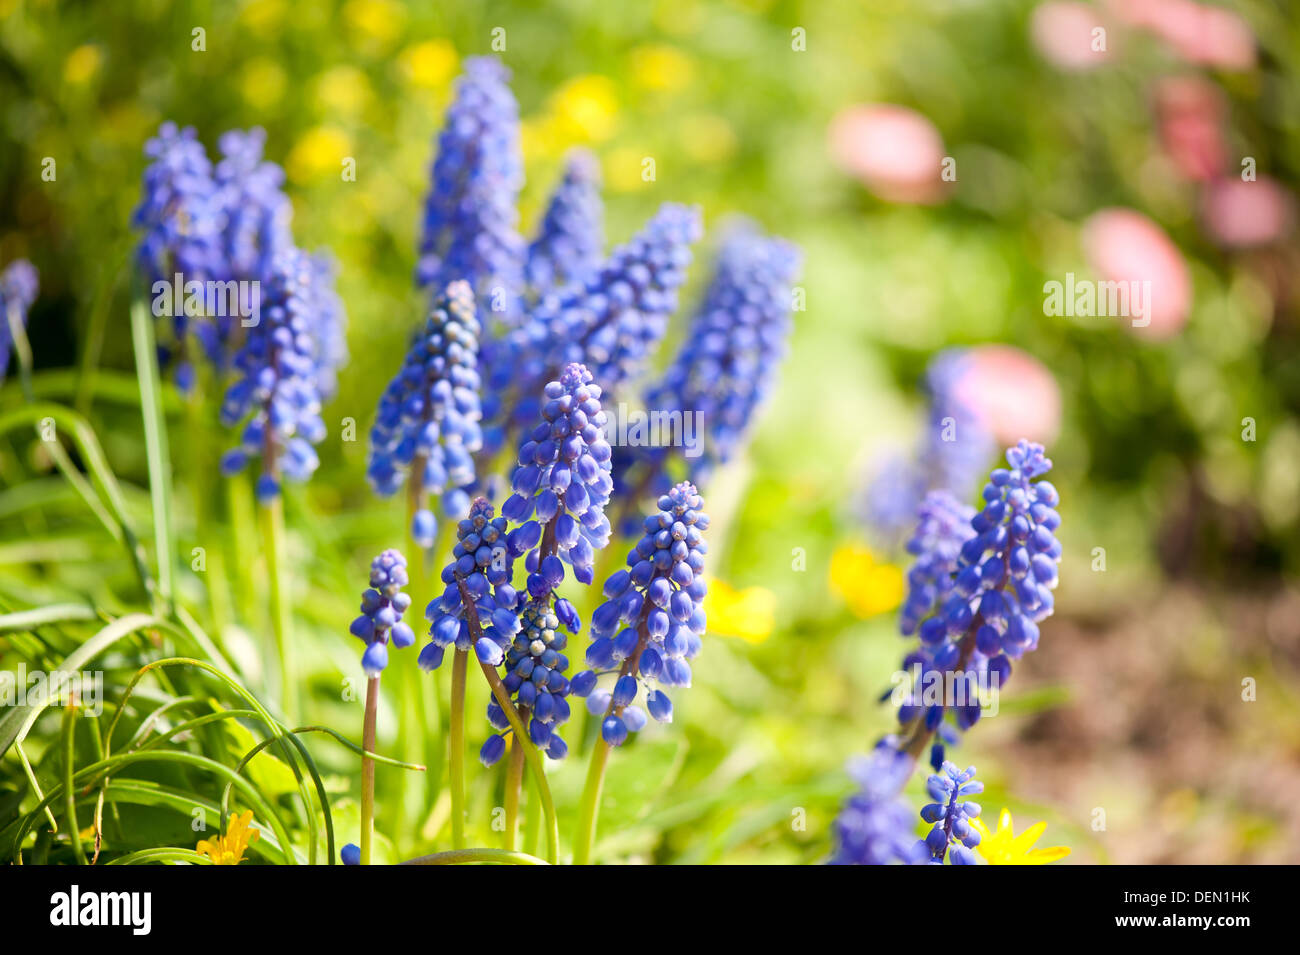 Muscari Mill blue bunches of grapes close-up Stock Photo